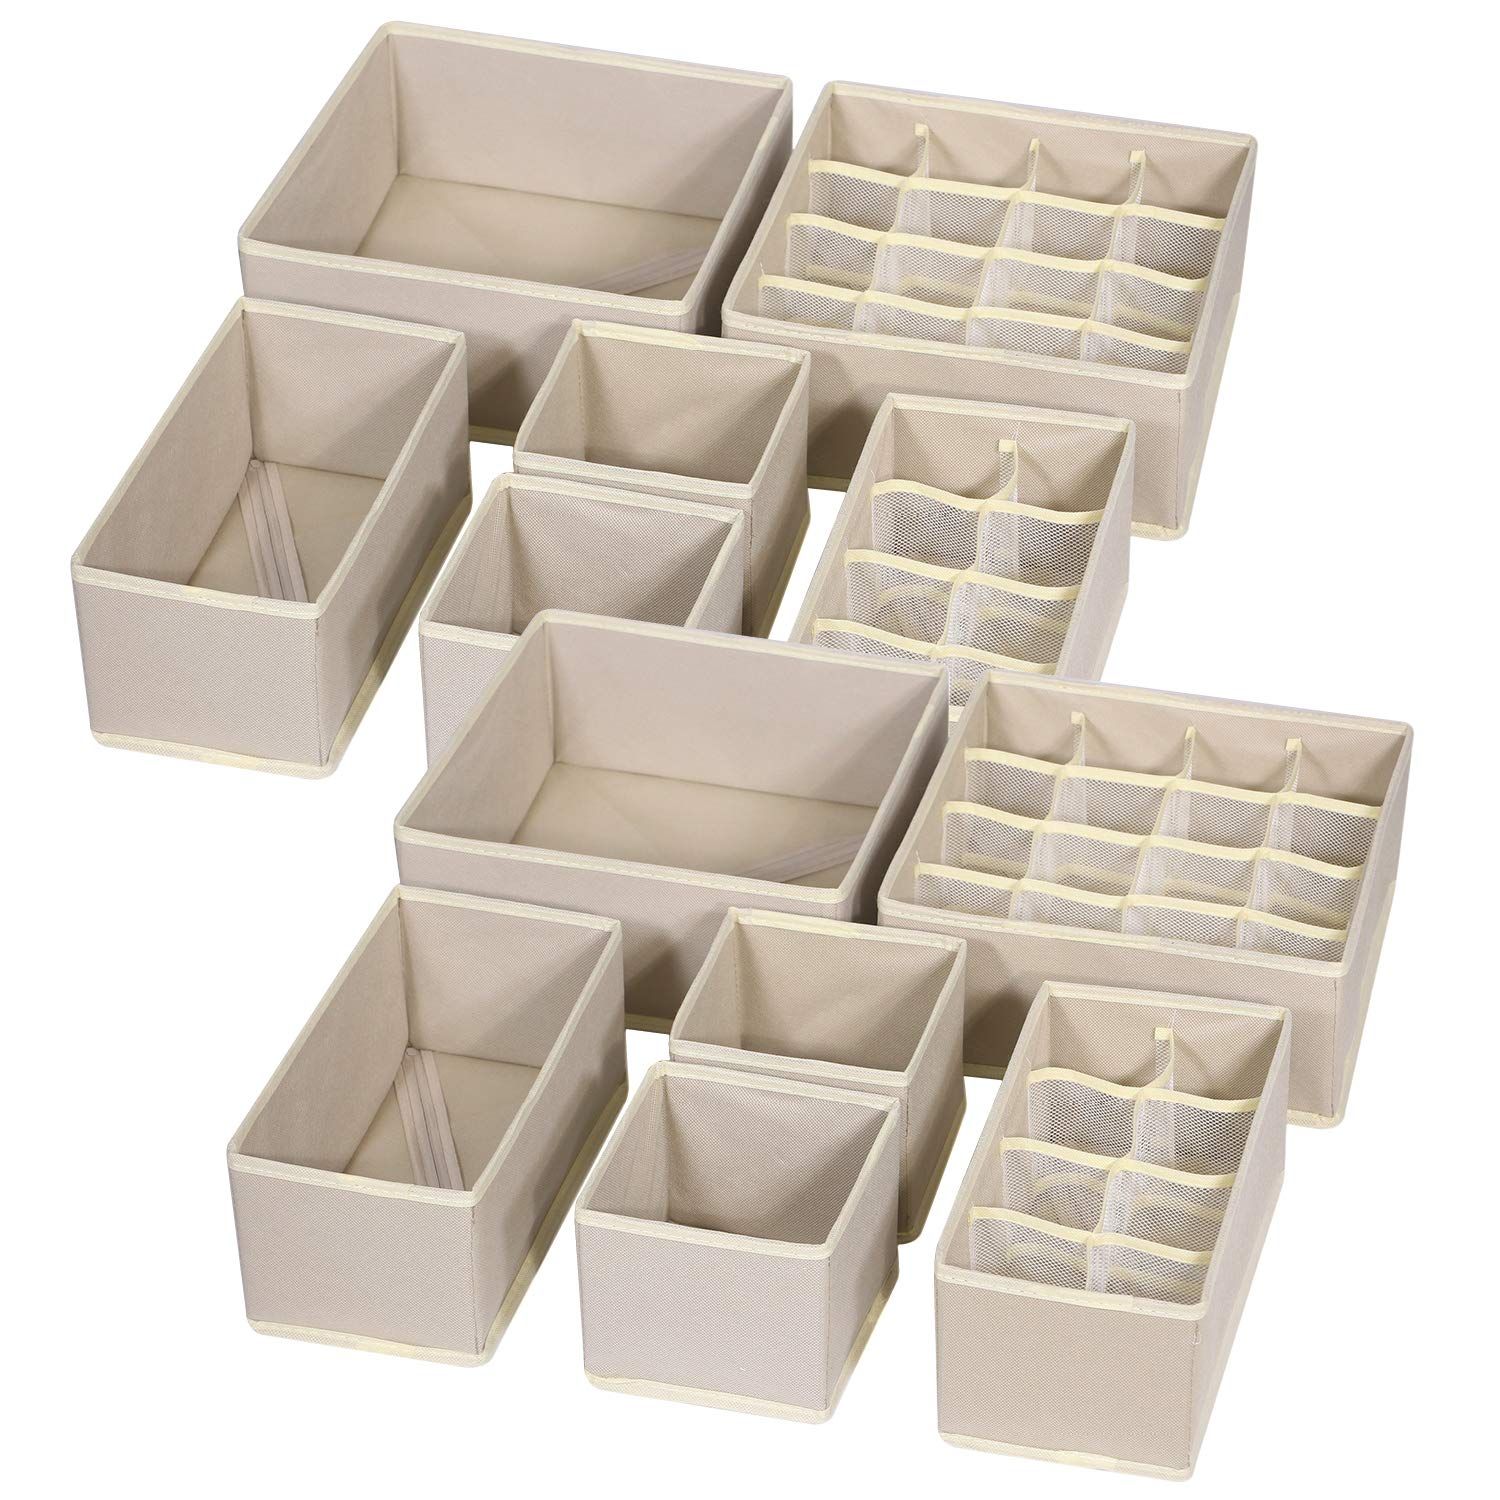 12 Pack Foldable Drawer Organizer Dividers Cloth Storage Box Closet Dresser Organizer Cube Fabric Containers Basket Bins for Underwear Bras Socks Panties Lingeries Nursery Baby Clothes Beige | Amazon (US)